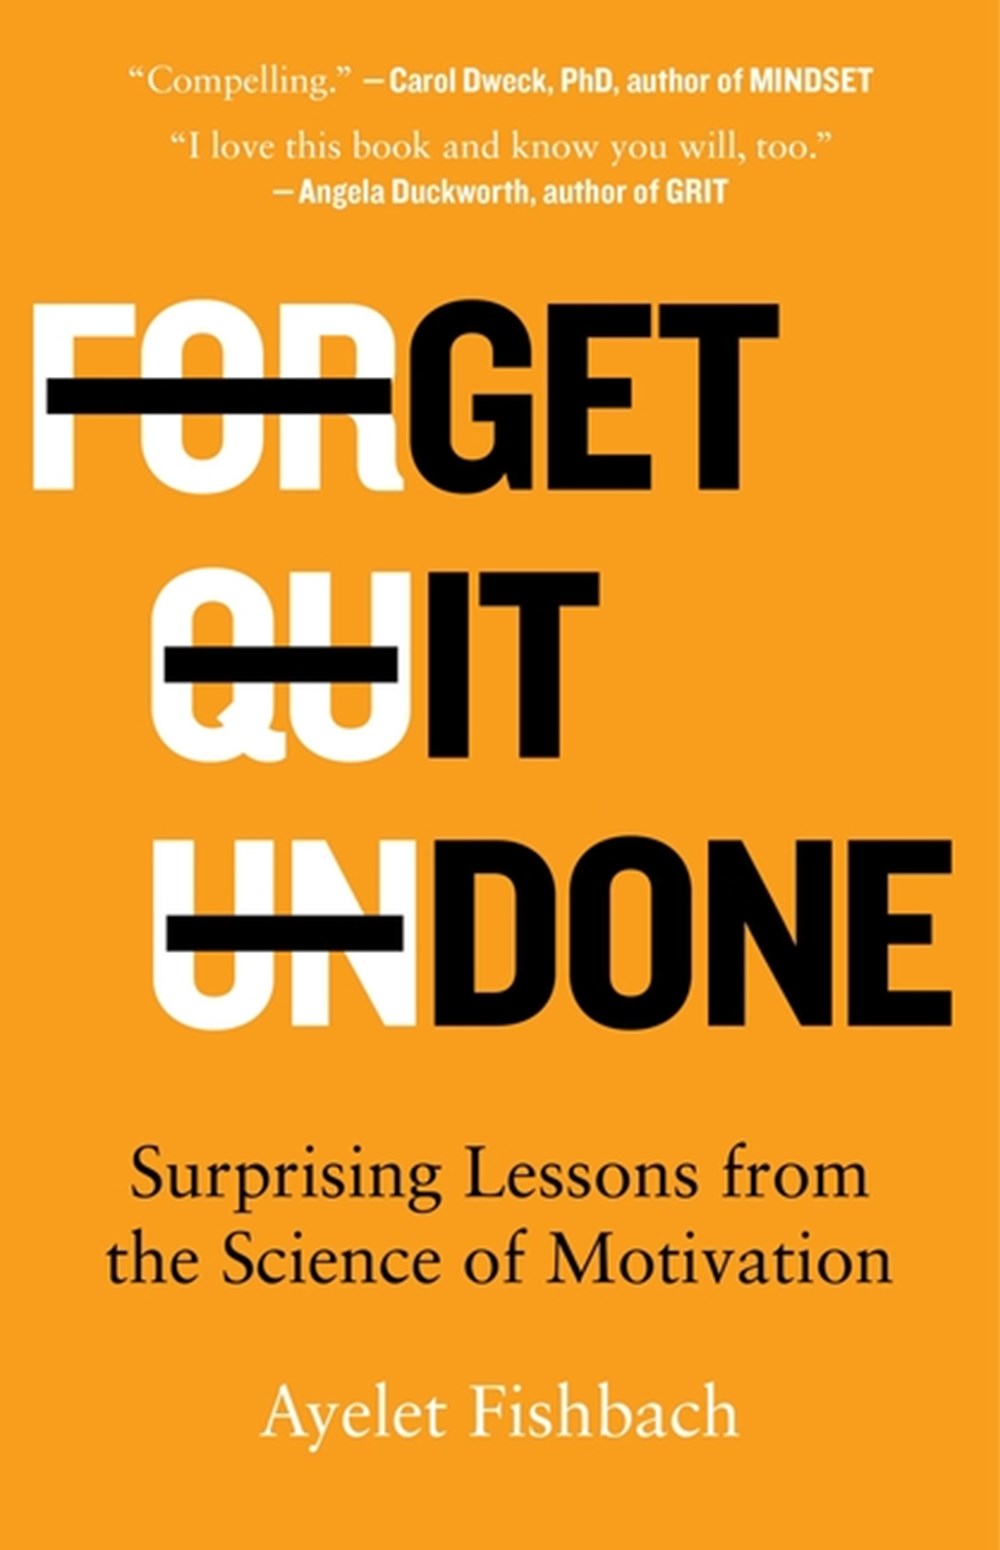 Get It Done Surprising Lessons from the Science of Motivation